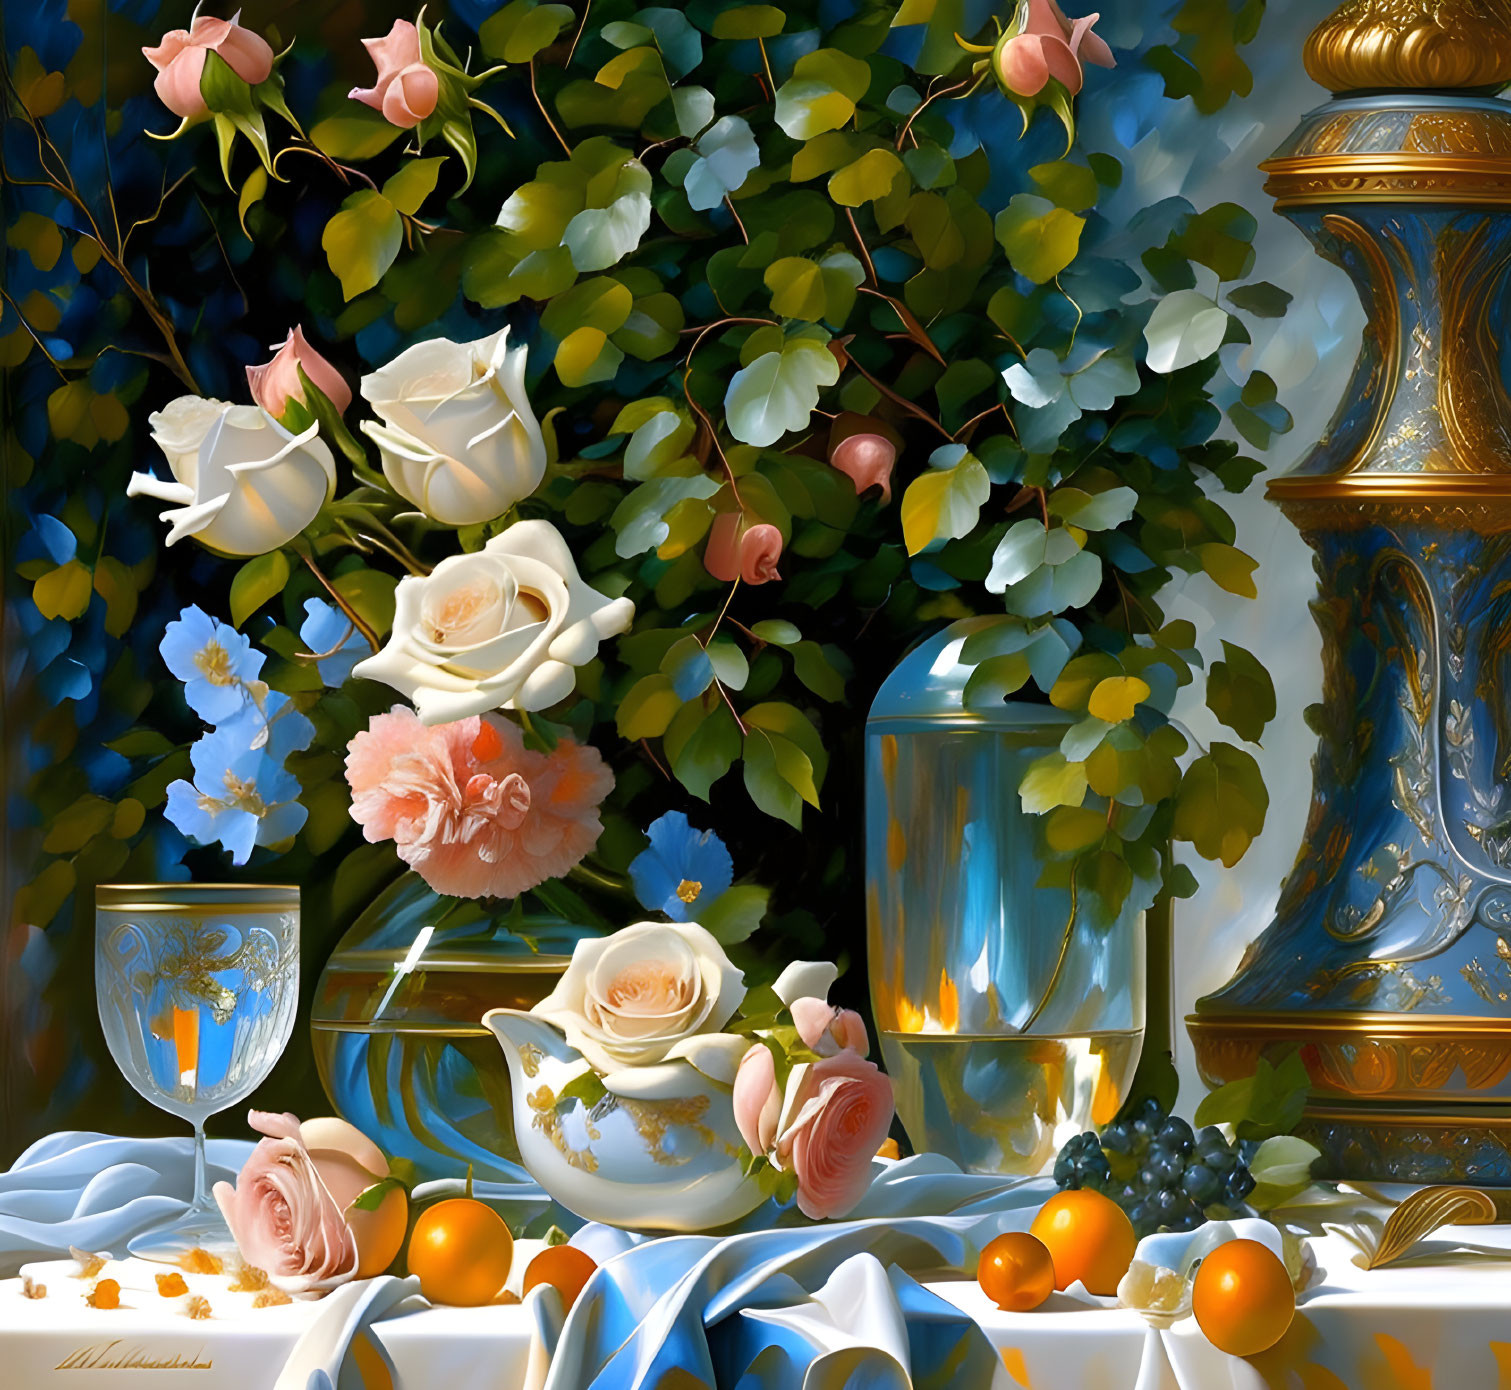 Ornate still life painting with roses, fruit, glassware, and blue backdrop